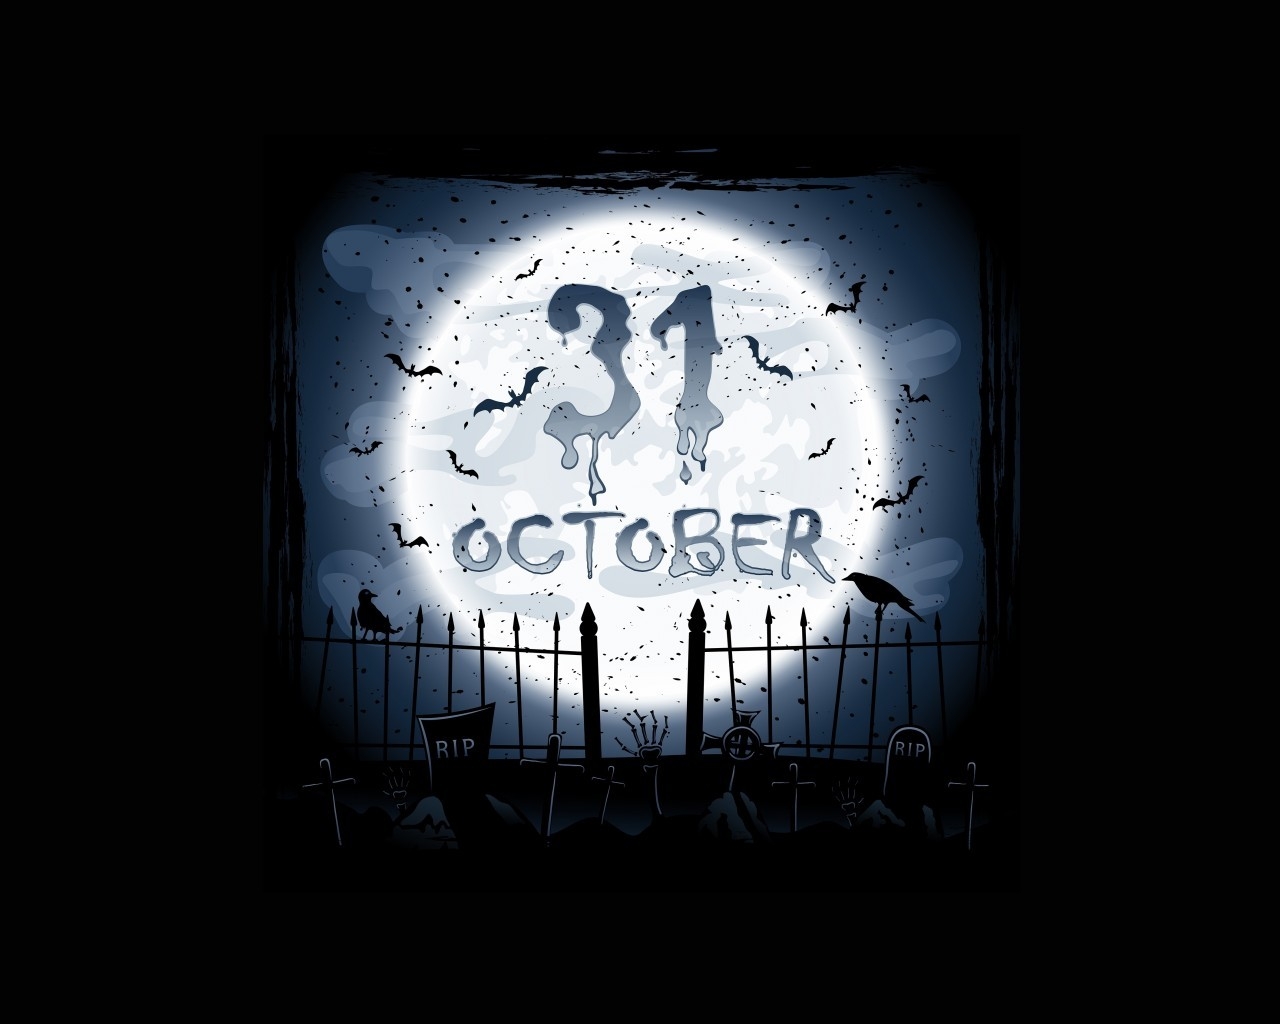 31 October for 1280 x 1024 resolution